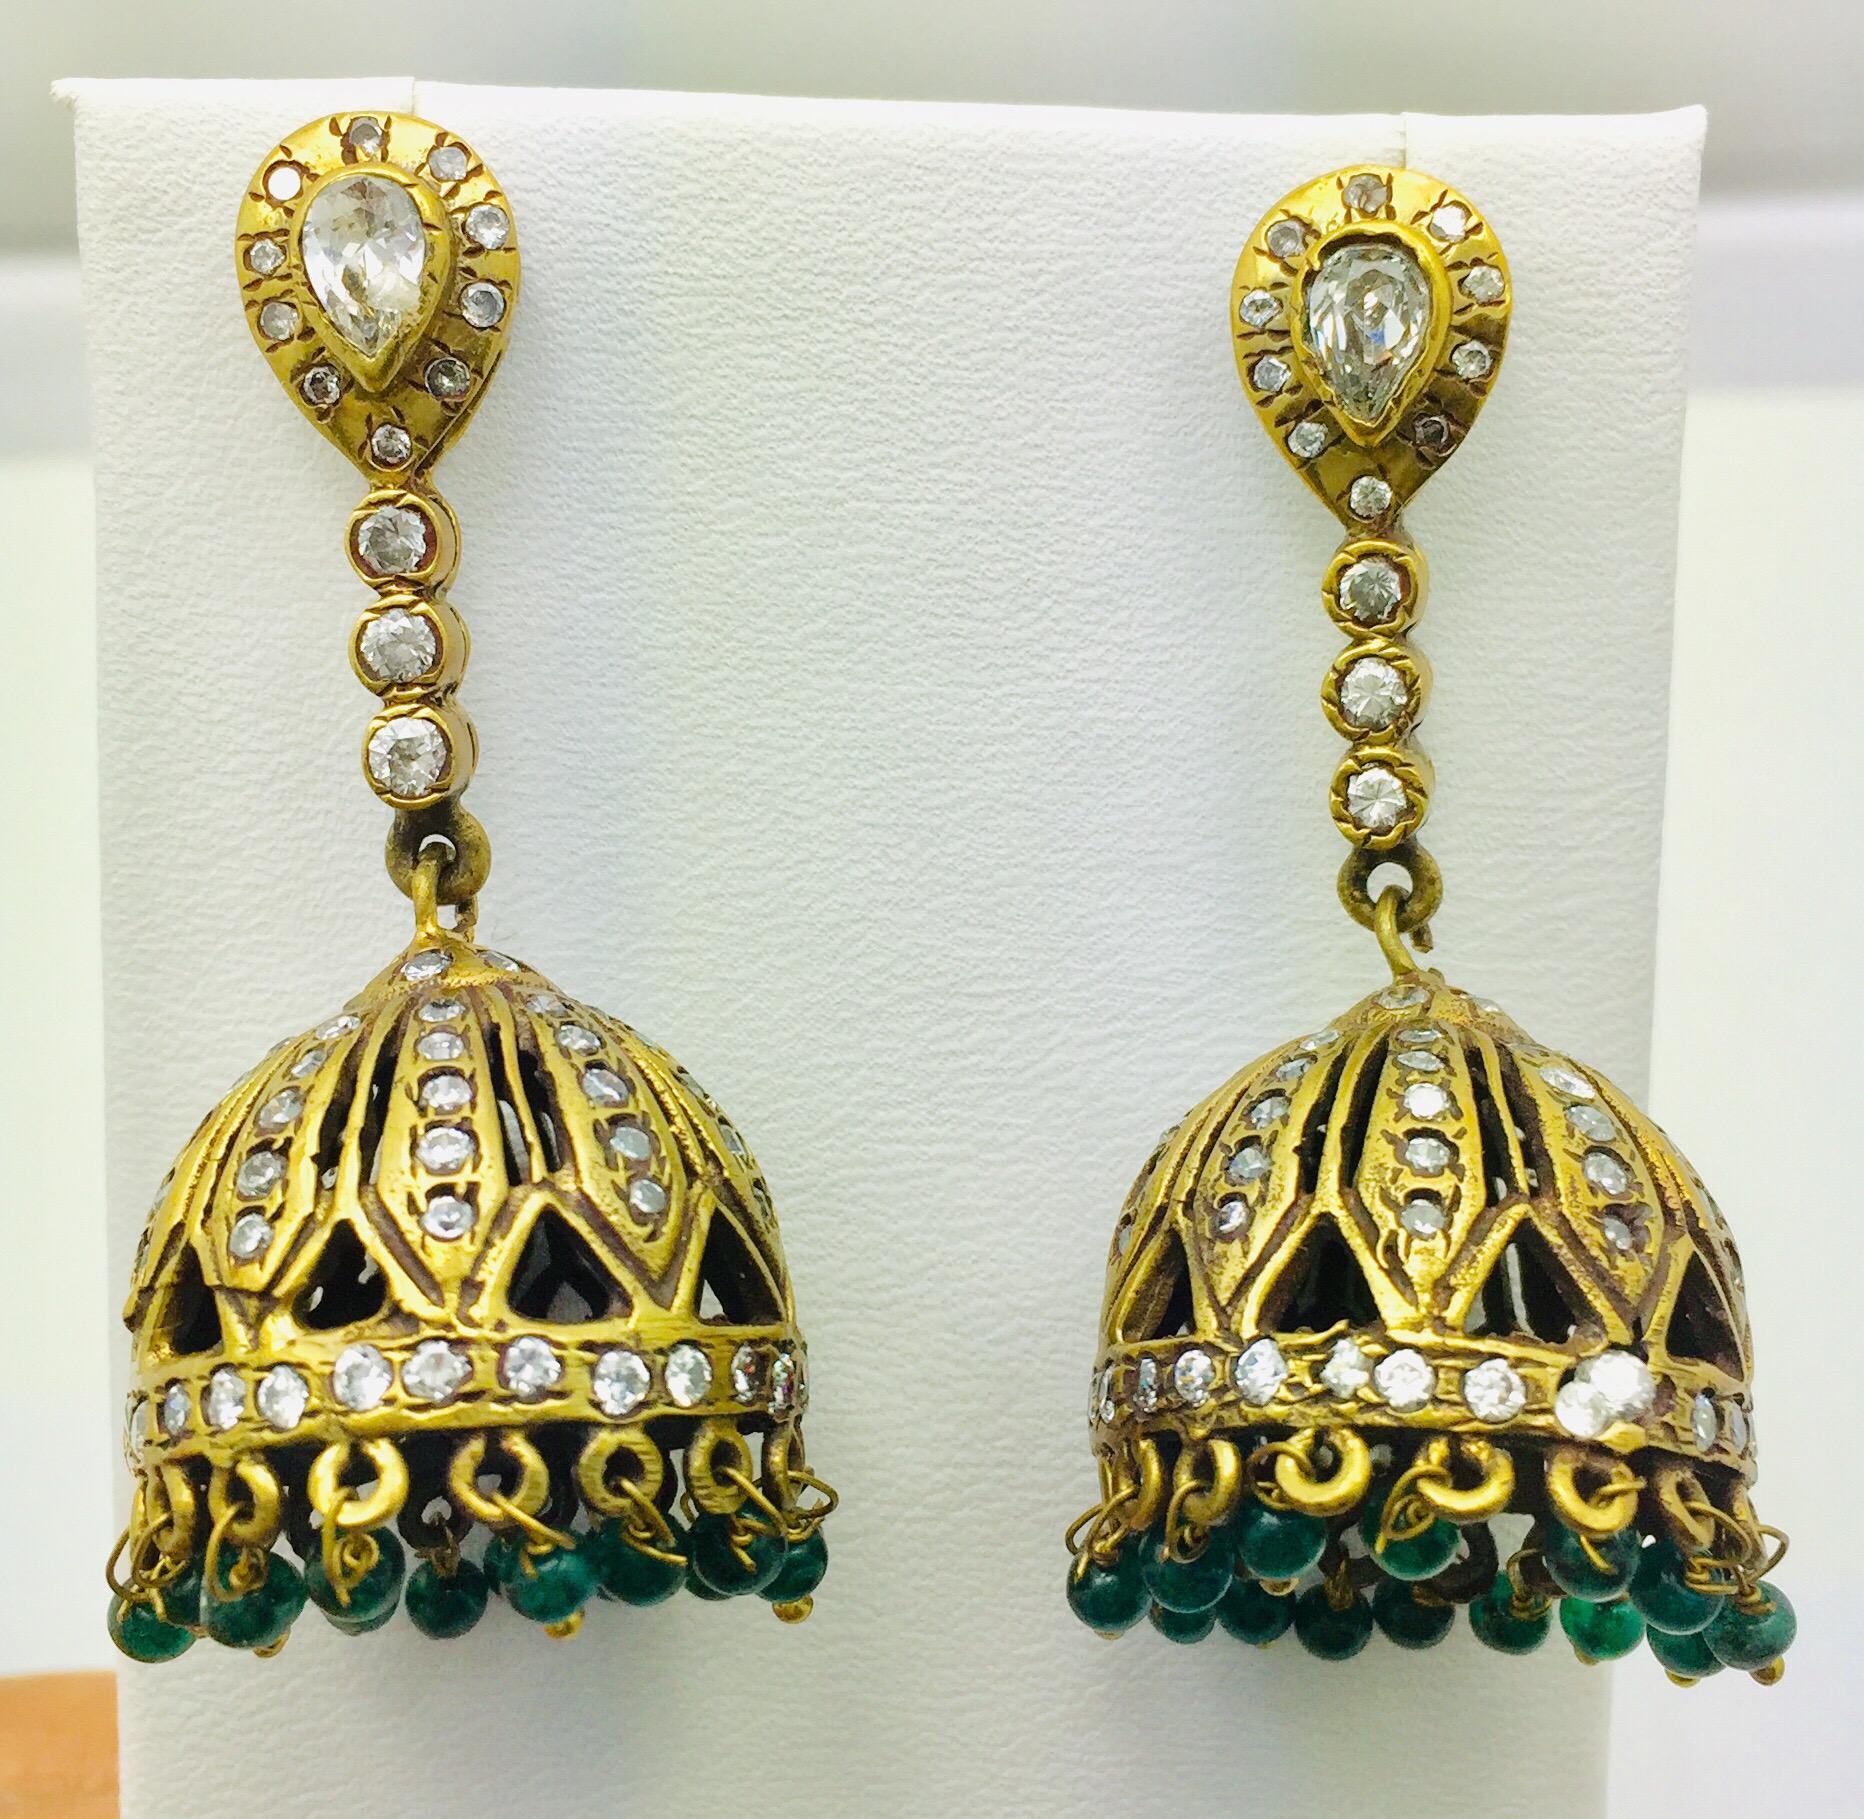 This dome shaped tassel drop earrings is enhanced with green beads.  They have varying pave crystal embellishments  Let them swing above a lace blouse for a ladylike look.

Metal: 18k gold plated
Stone: Green beads, cubic zircon
Length: 2 1/2